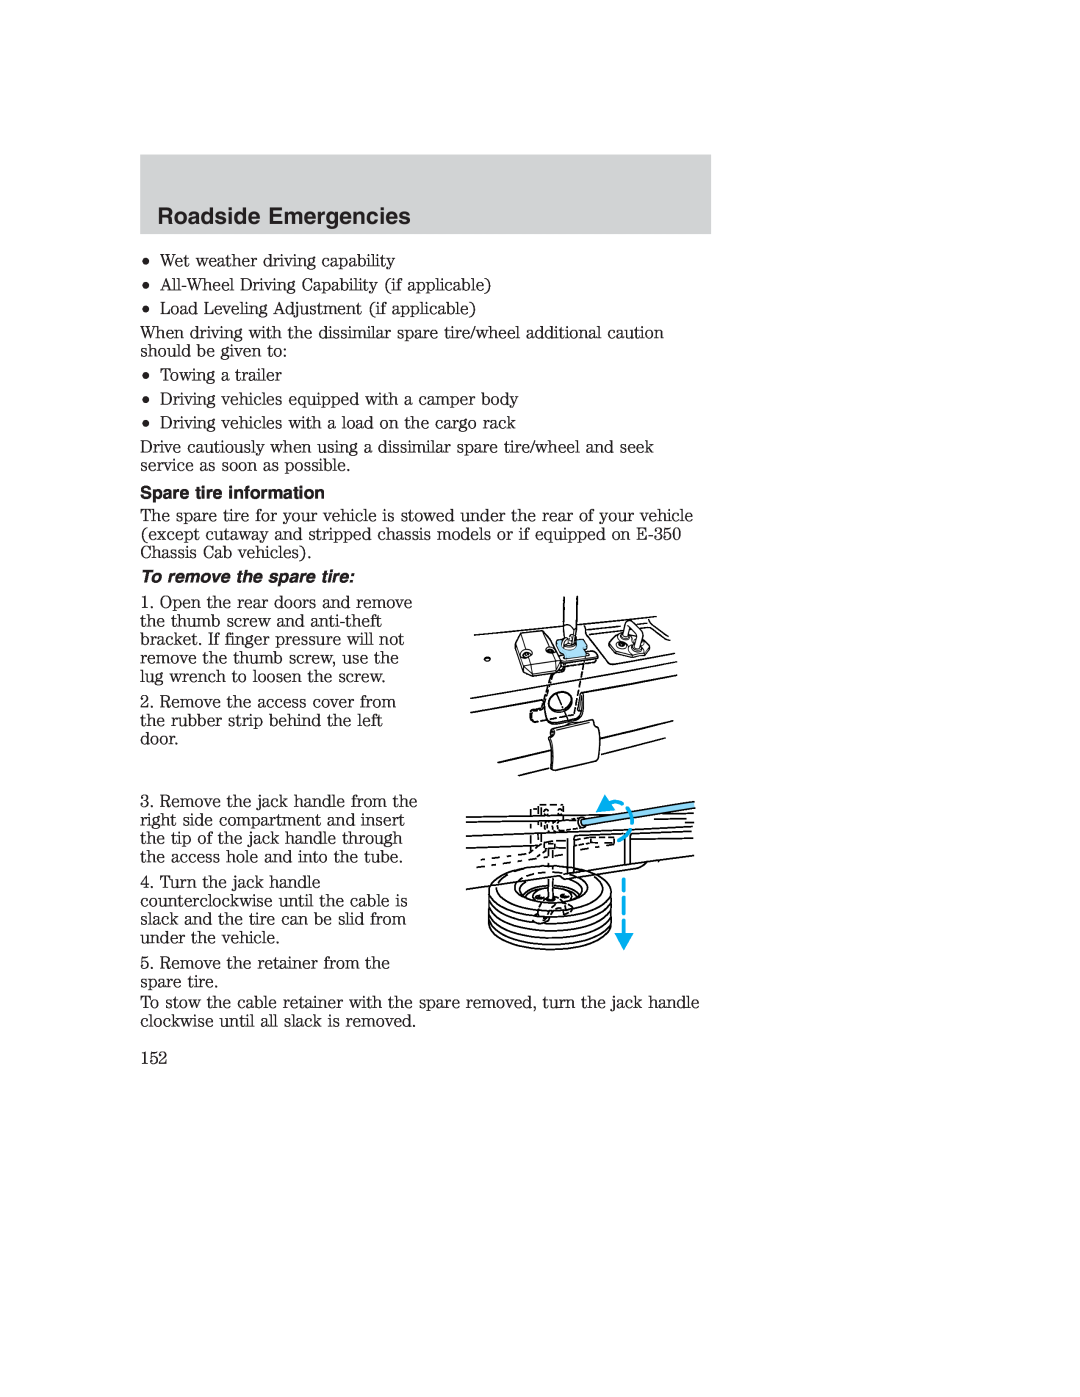 Ford AM/FM stereo manual Spare tire information, To remove the spare tire, Roadside Emergencies 